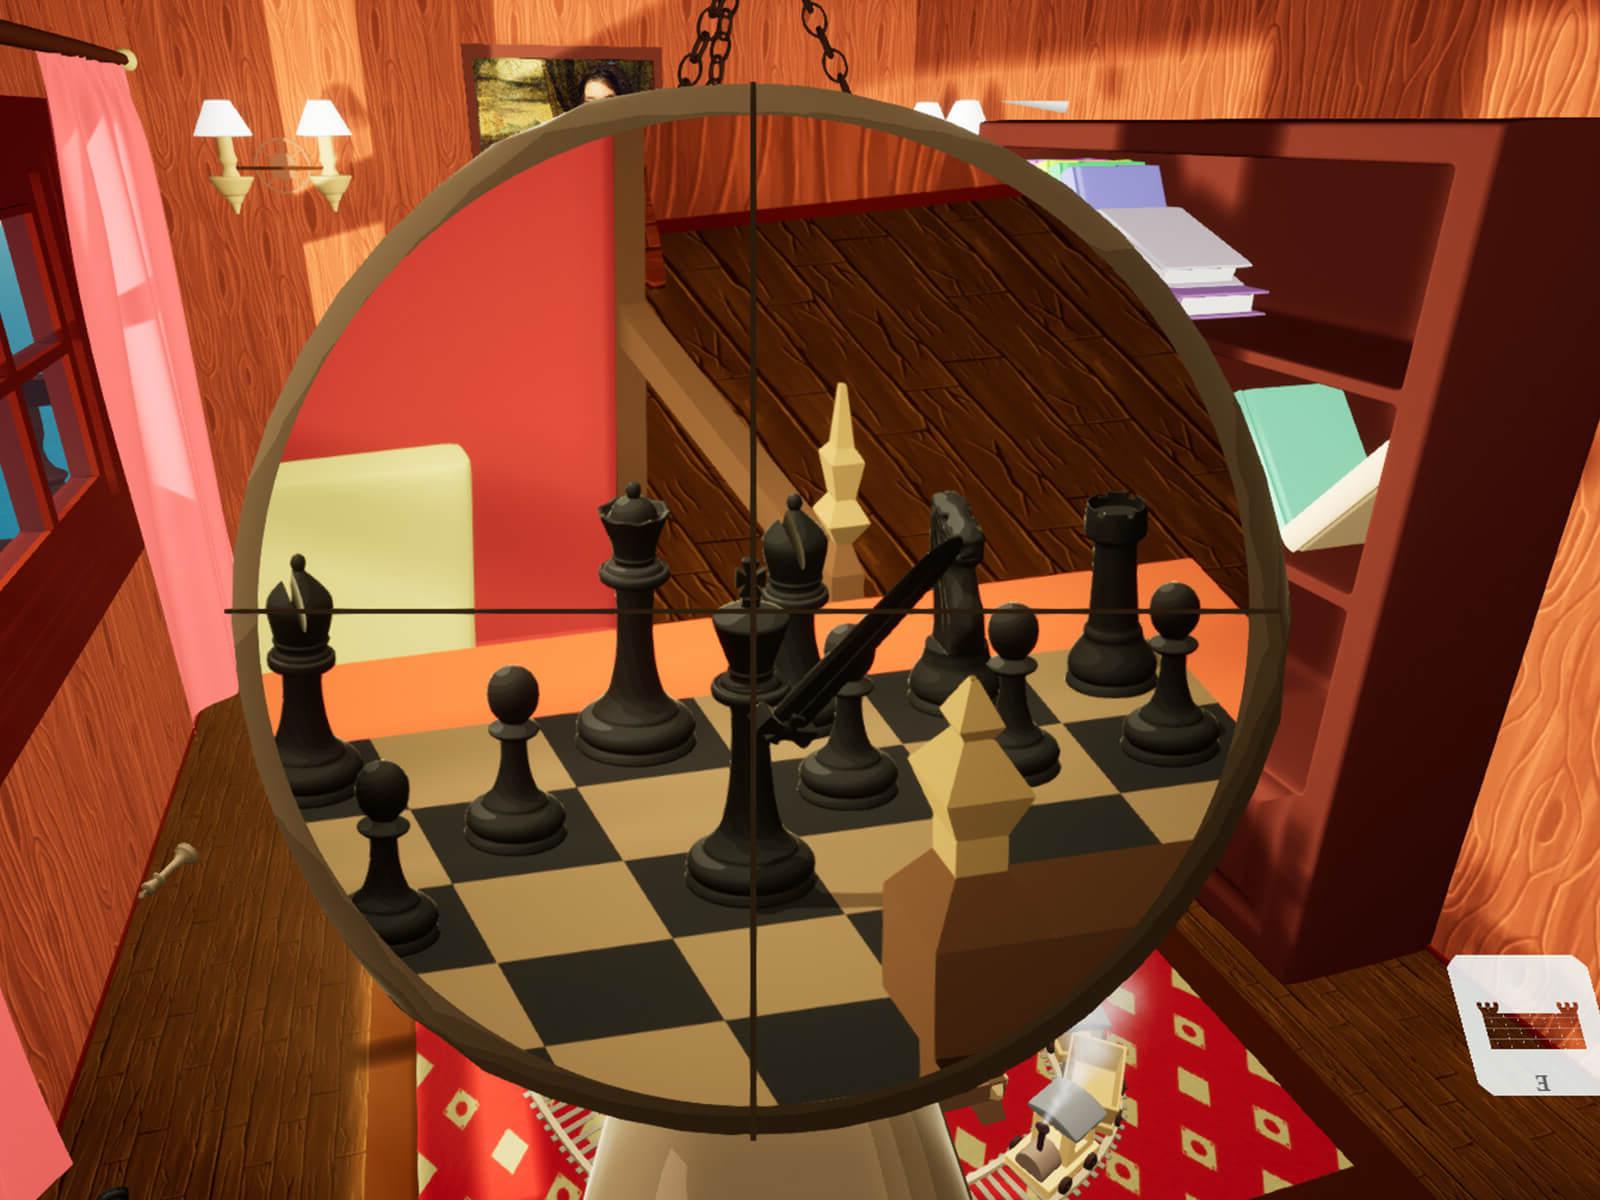 A rook looks at a king down the barrel of its sniper rifle in FPS Chess.